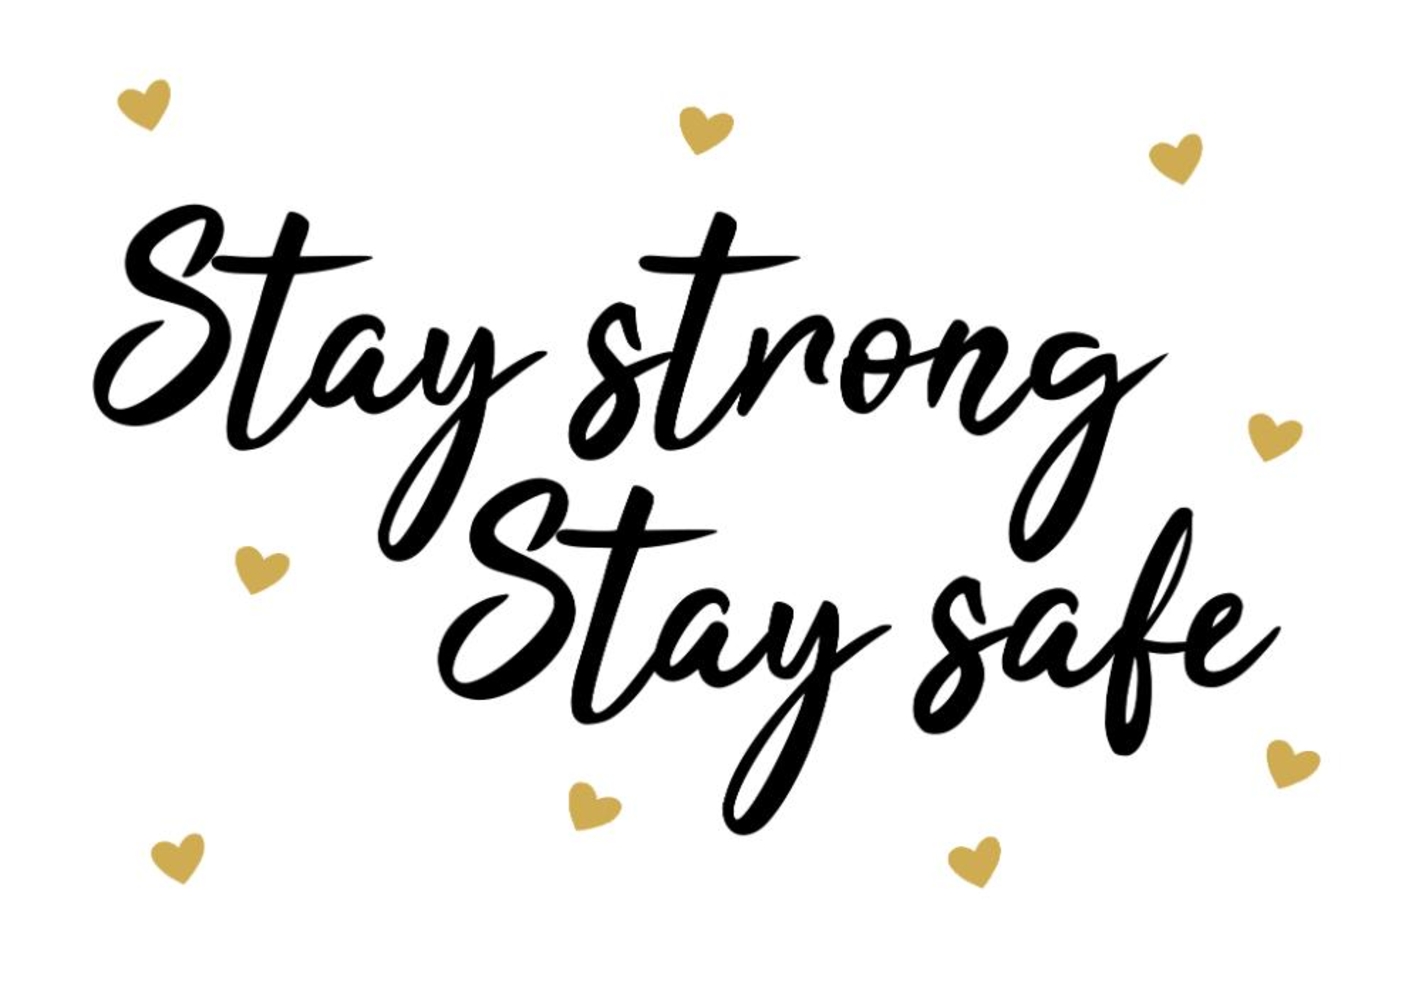 Stay strong stay save kaart hartjes Voorkant